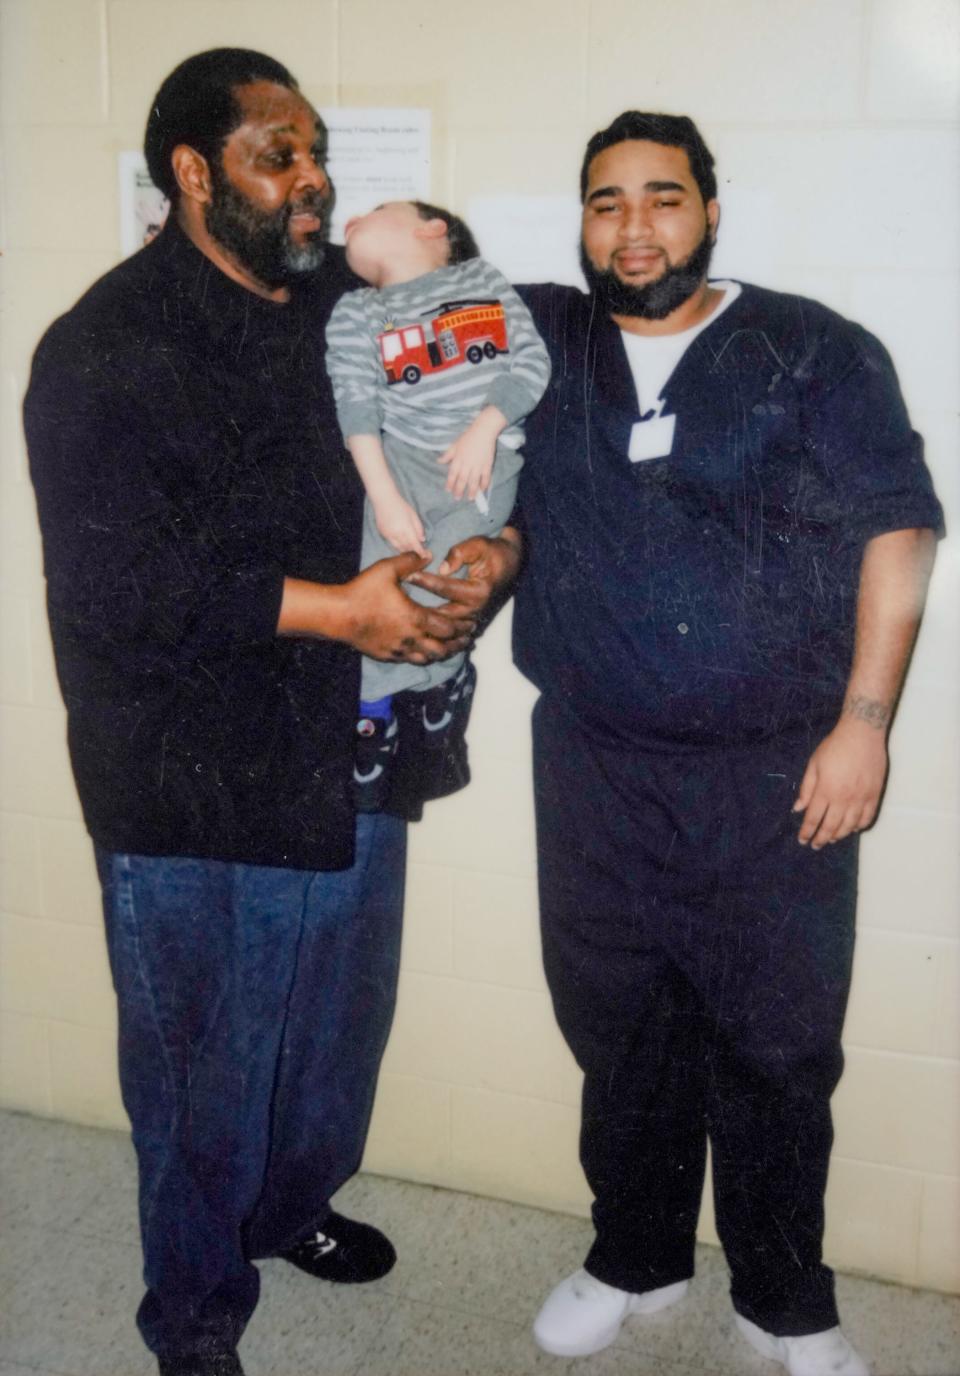 A snapshot shows Melvin Spivey, left, on a visit with his grandson Donovann Hall at the Adult Correctional Institutions. Spivey is holding Hall's son, J-ayden, now age 10 .